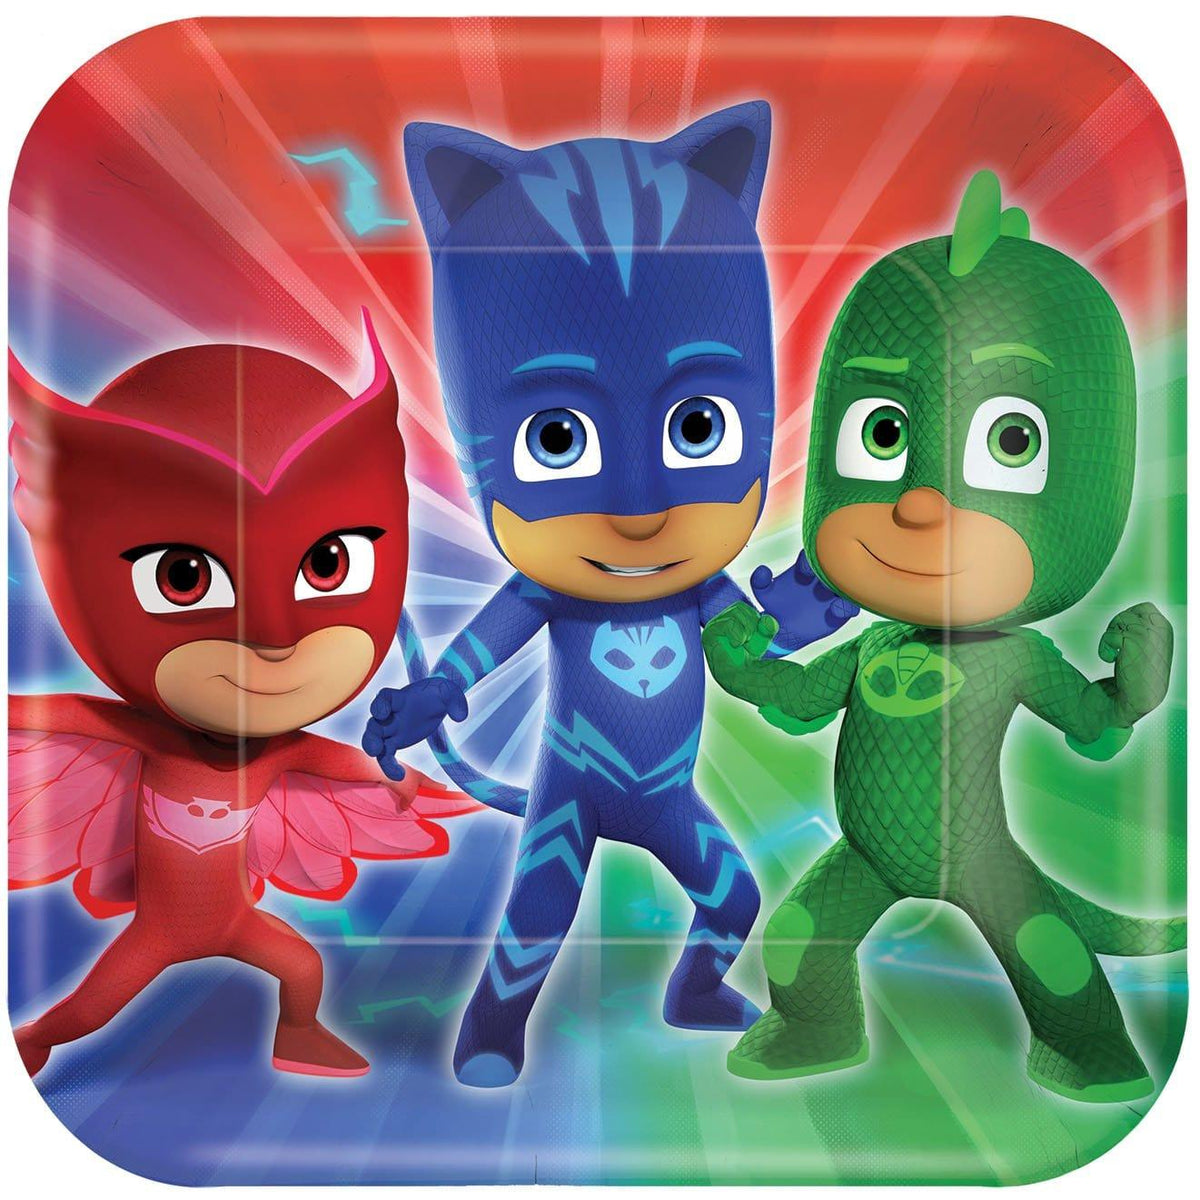 Buy Kids Birthday PJ Masks Dinner Plater 9 inches, 8 per package sold at Party Expert